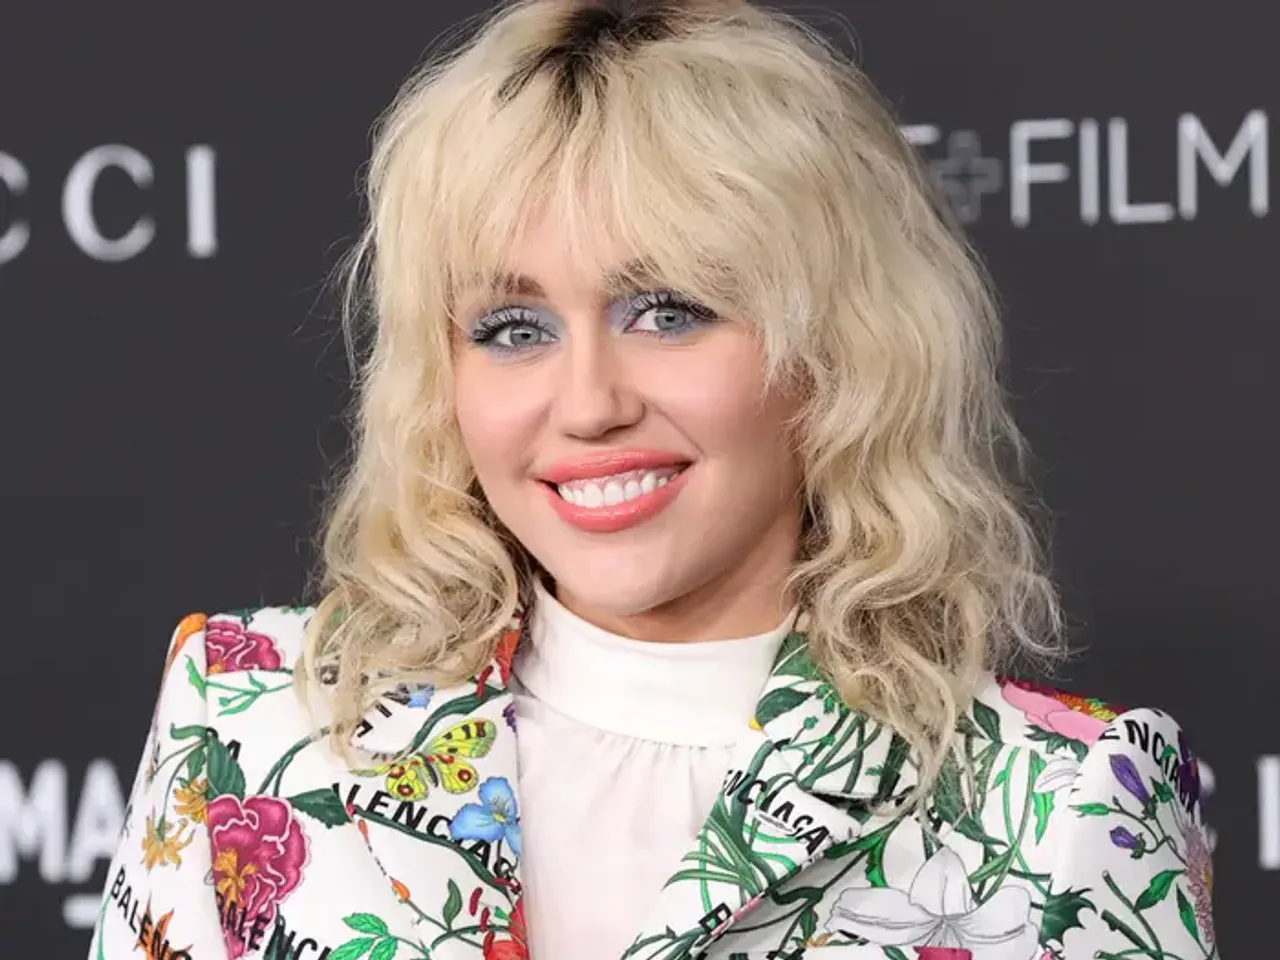 Miley Cyrus' Flowers Release Date